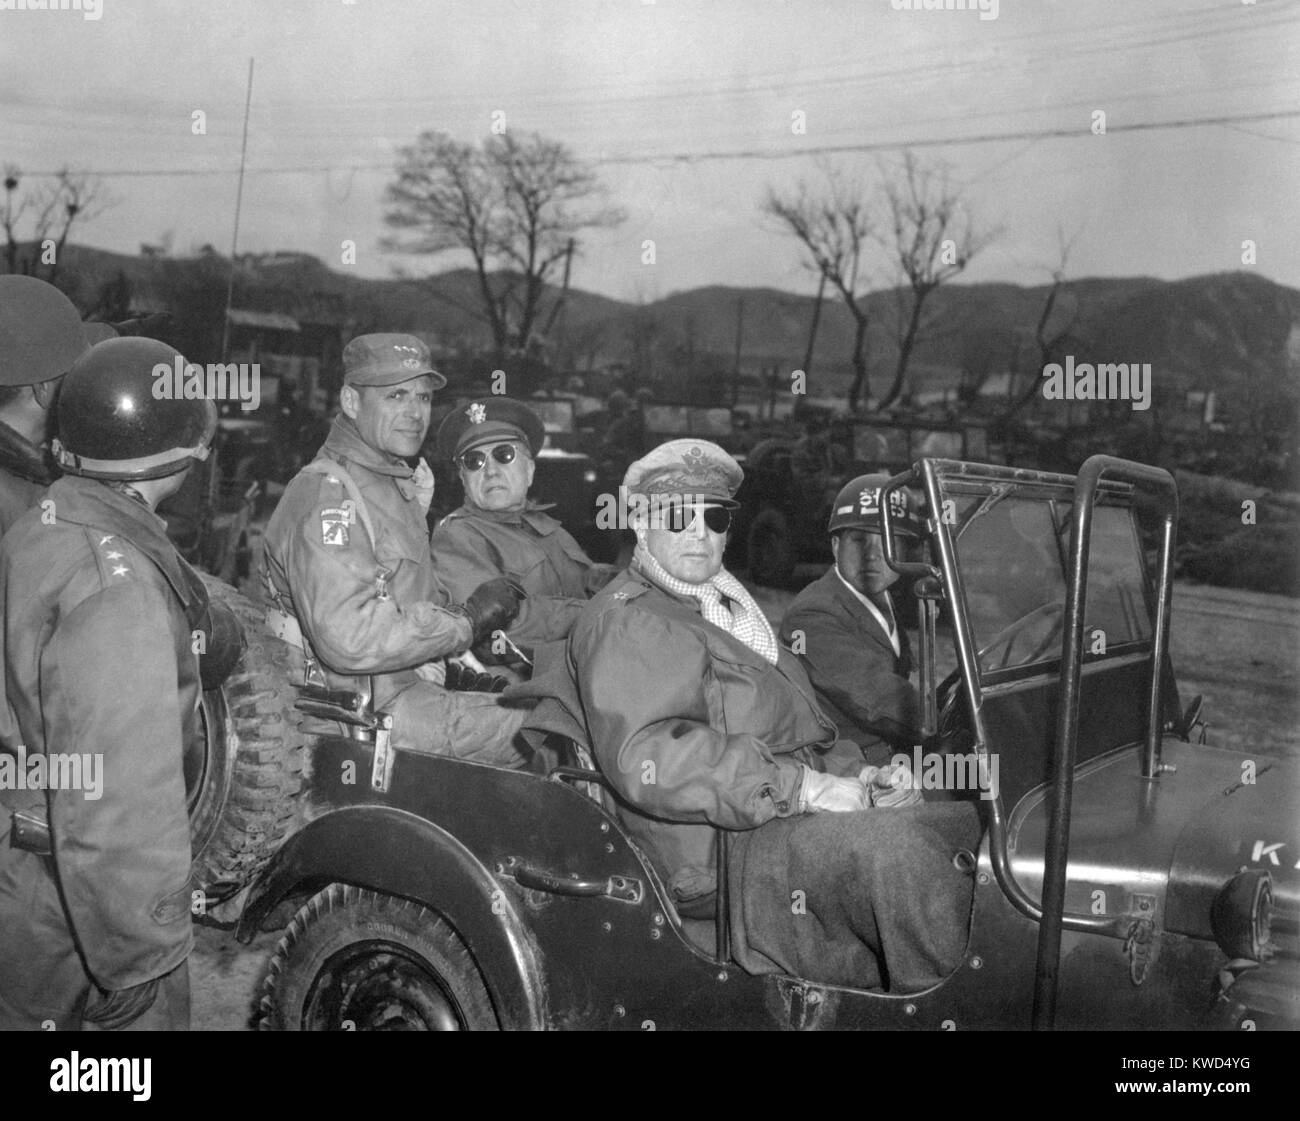 Commanders of U.N. Forces in Korea, in a jeep at a command post, Yang Yang, approximately 15 miles north of the 38th parallel, April 3, 1951. A week later Gen. Douglas MacArthur (right, sunglasses), was relieved of his command and replaced by Lt. Gen. Matthew Ridgeway (hat with 3 stars). Beside Ridgeway is Maj. Gen. Doyle Hickey. Korean War, 1950-53. (BSLOC 2014 11 136) Stock Photo